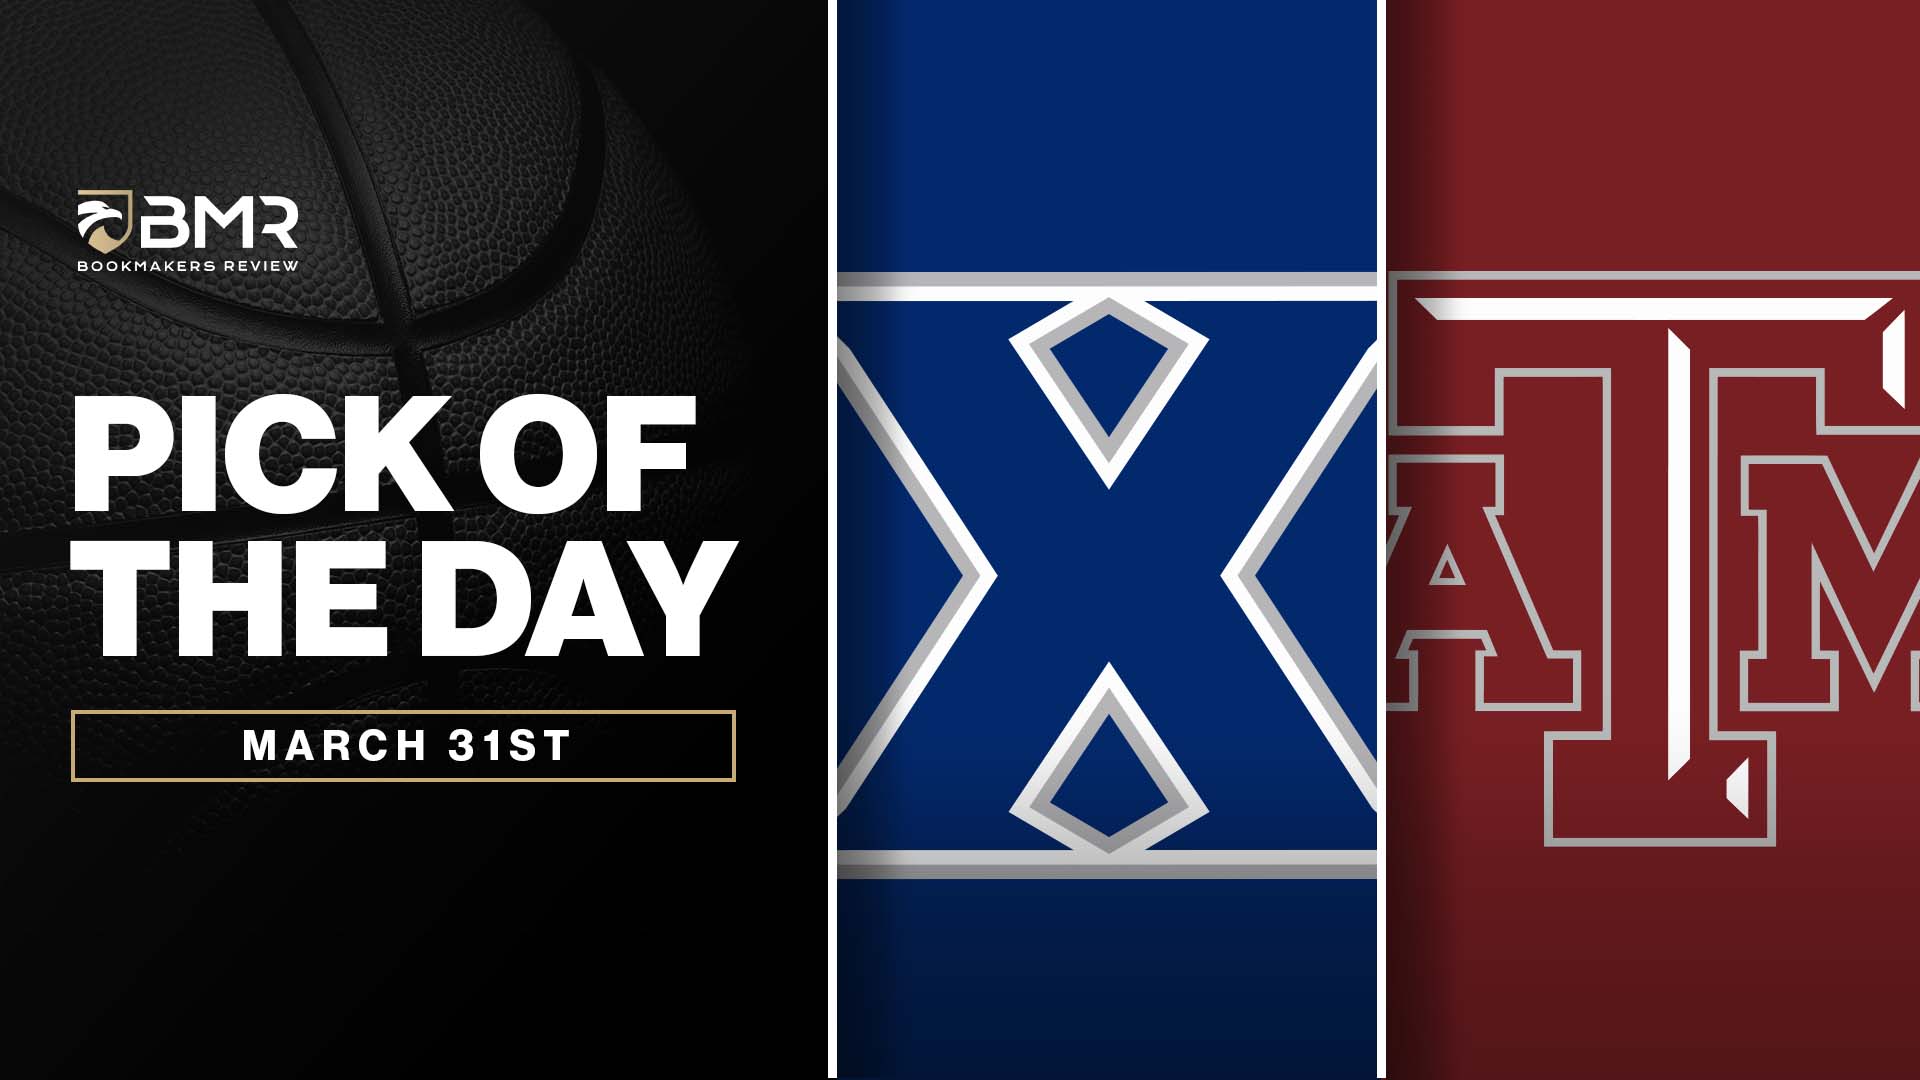 Xavier vs. Texas A&M | Free NCAAB March Madness Pick by Le Martin - Mar. 31st